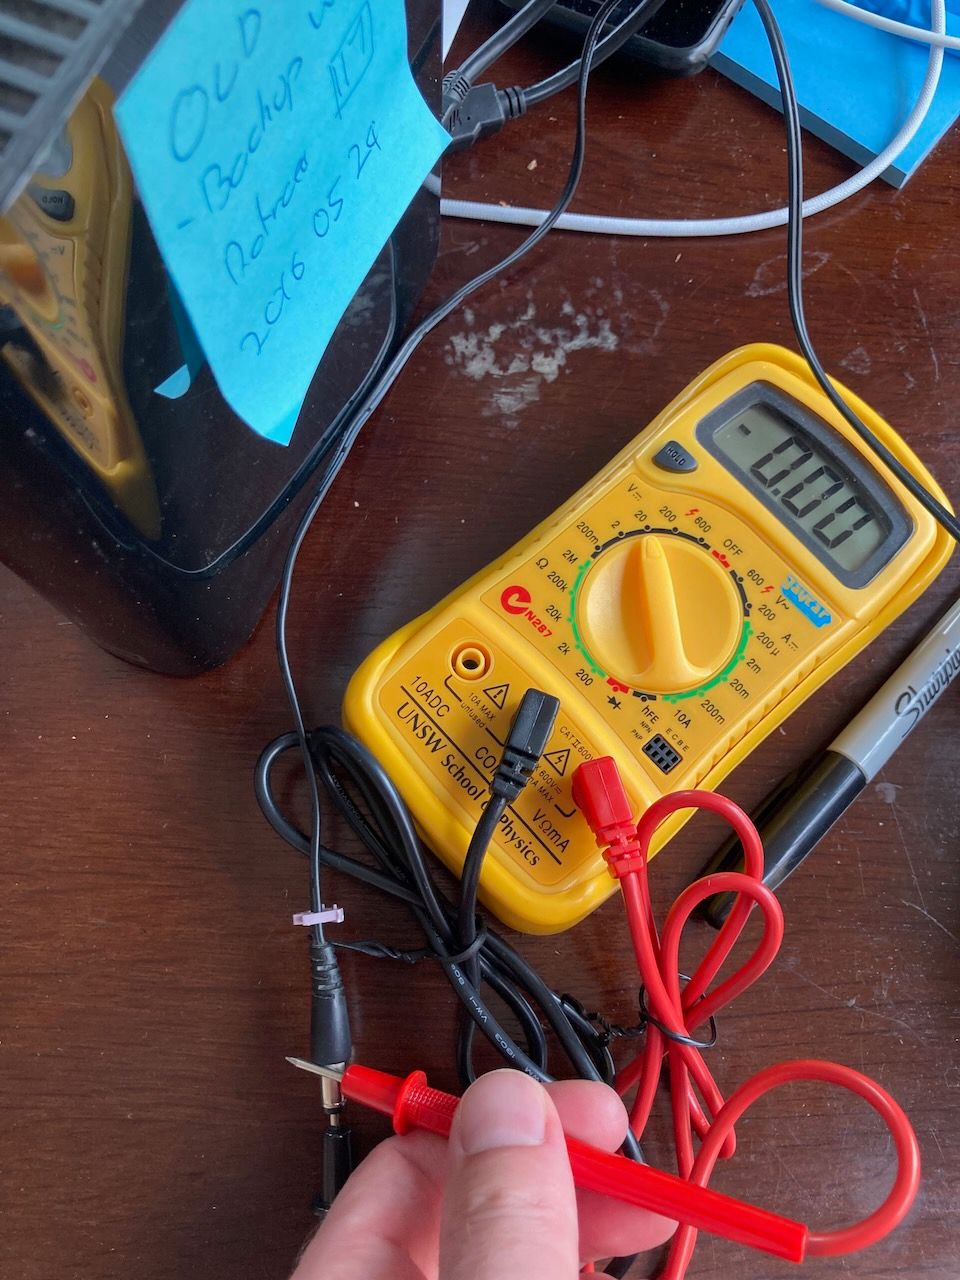 multimeter showing 0.00V connected to power supply